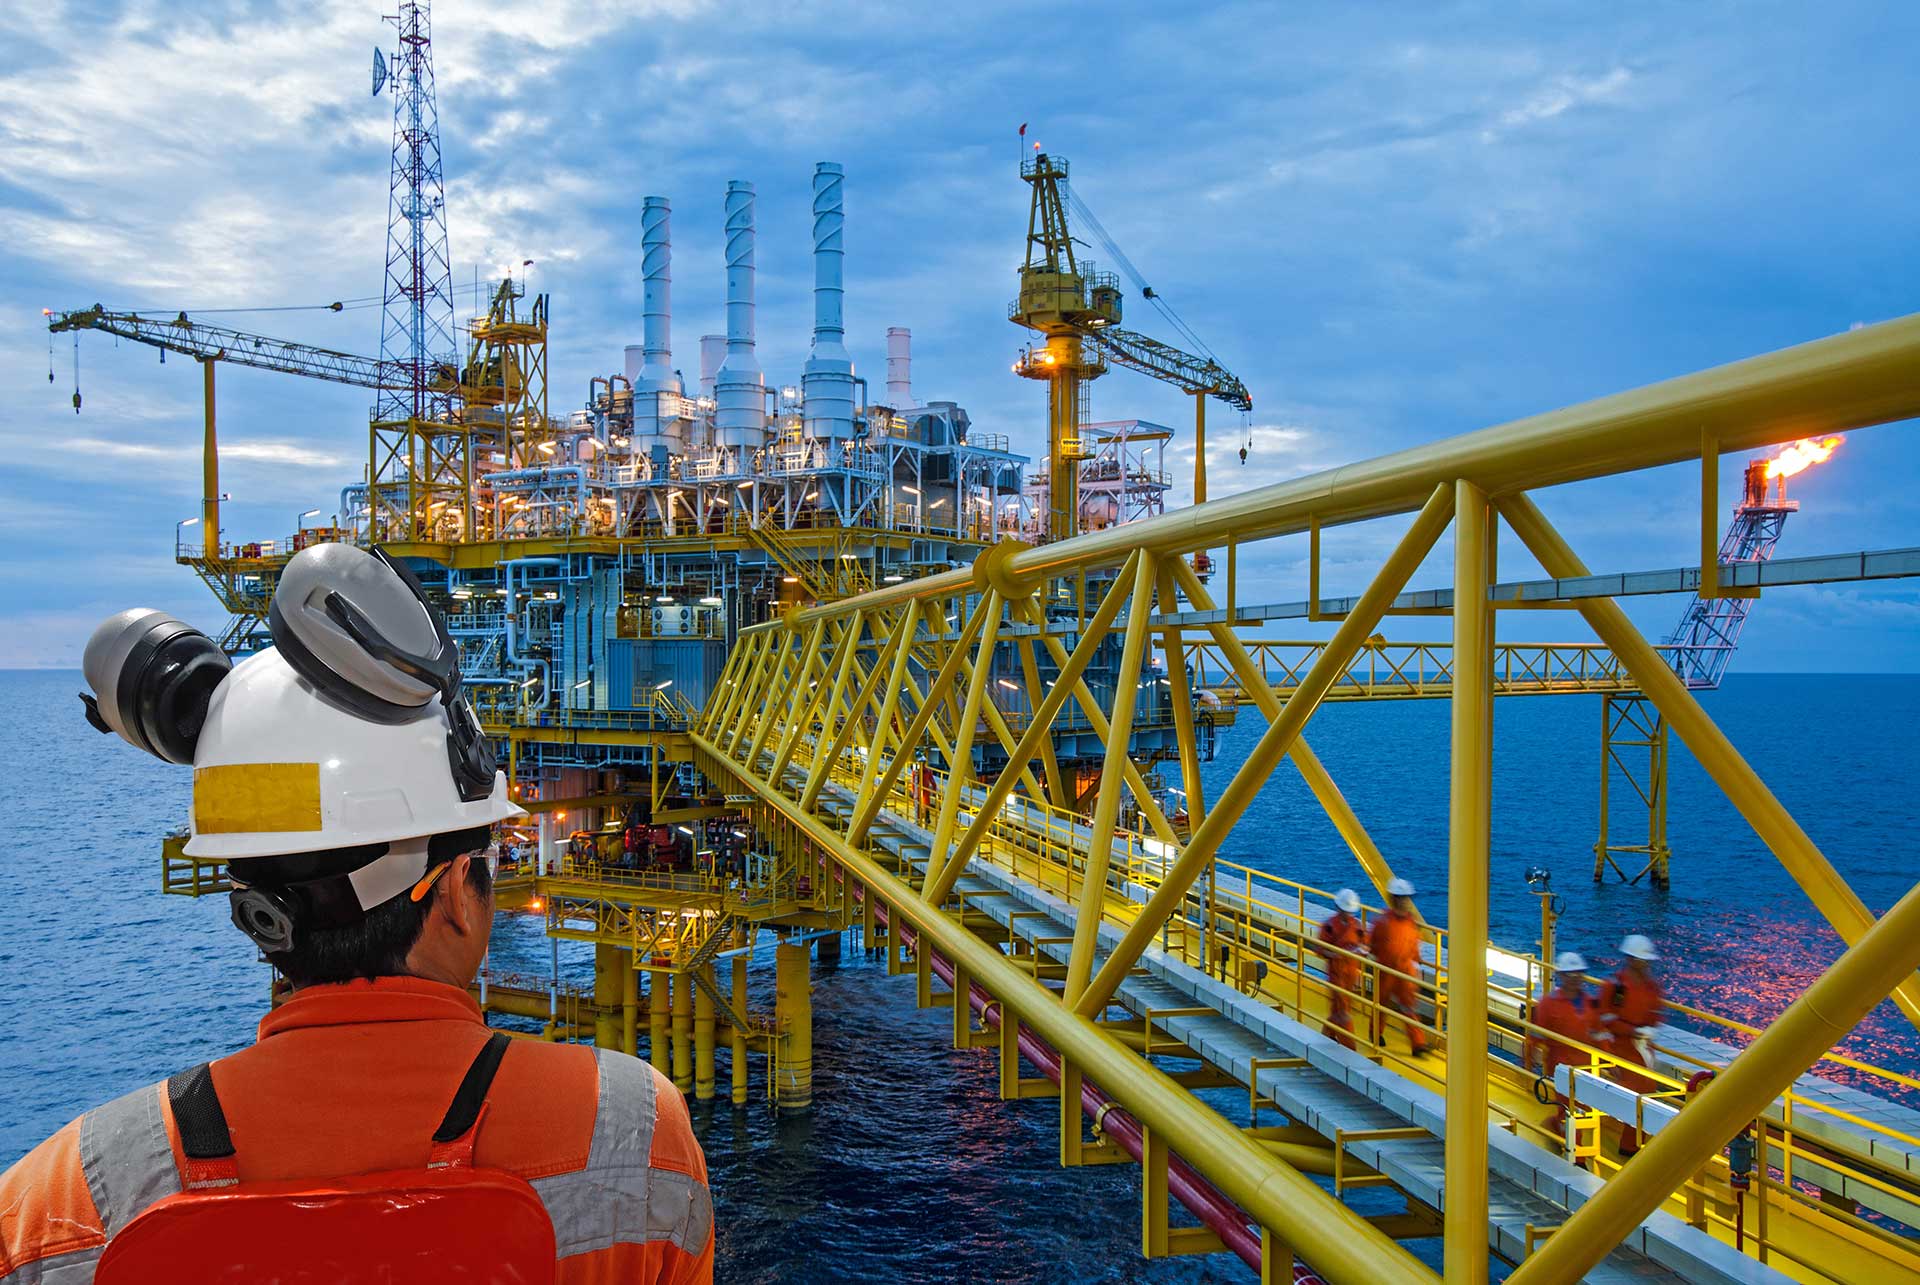 GMCG successfully completed a fixed platform structure and topside design project for a Oil Major in Asia